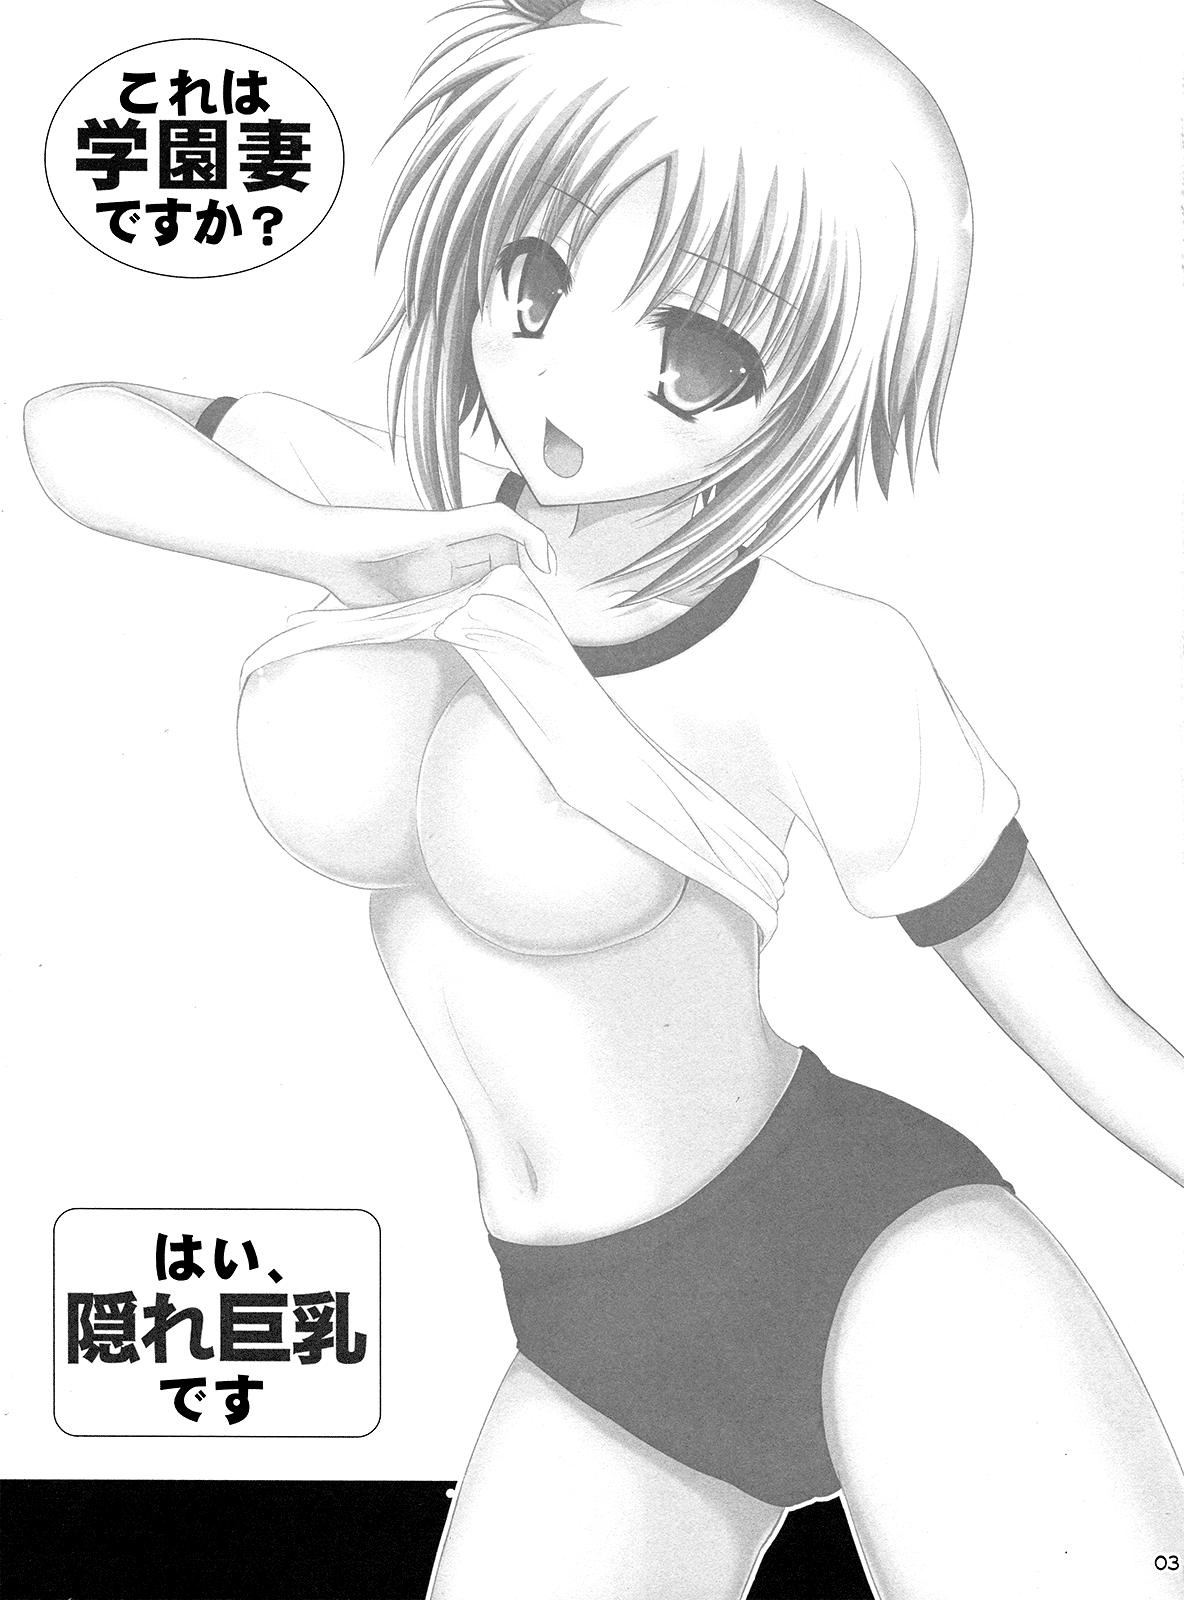 Gay Dudes Is This A School Wife? Yes, She Secretly Has Big Breasts - Kore wa zombie desu ka Natural Boobs - Page 2